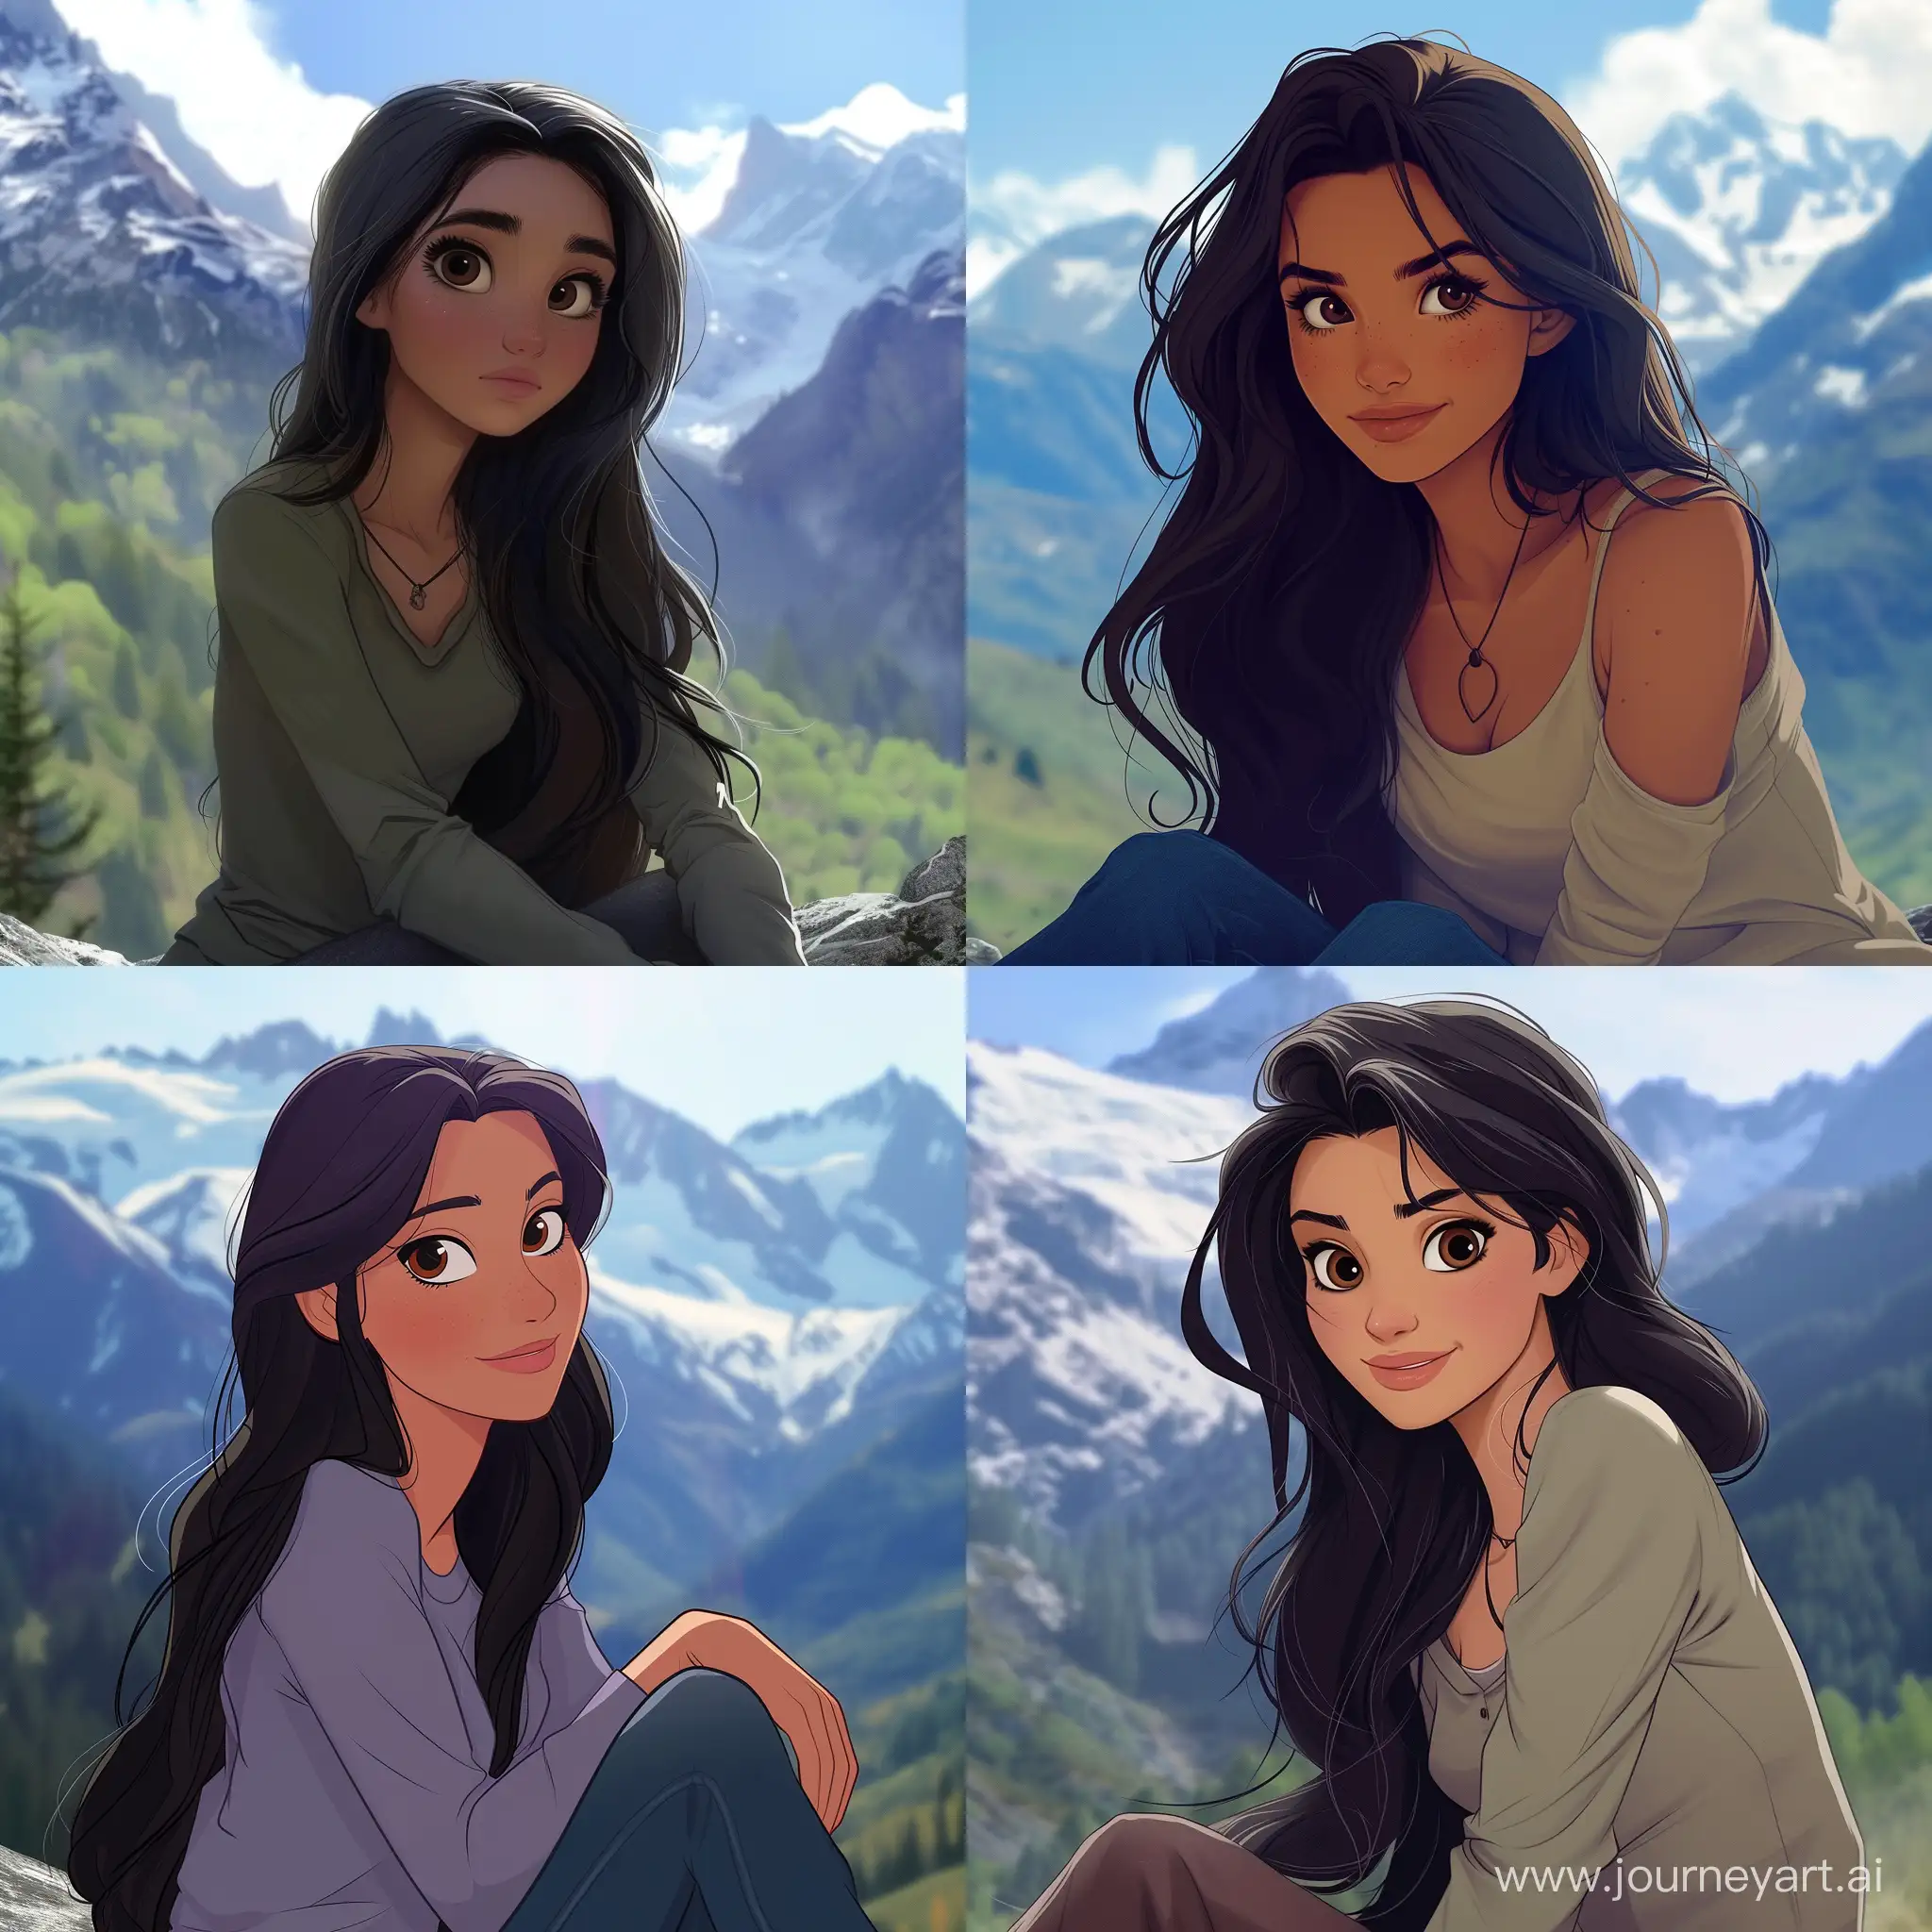 Disney pixar style, a young woman with long dark hair and brown eyes sitting near mountains